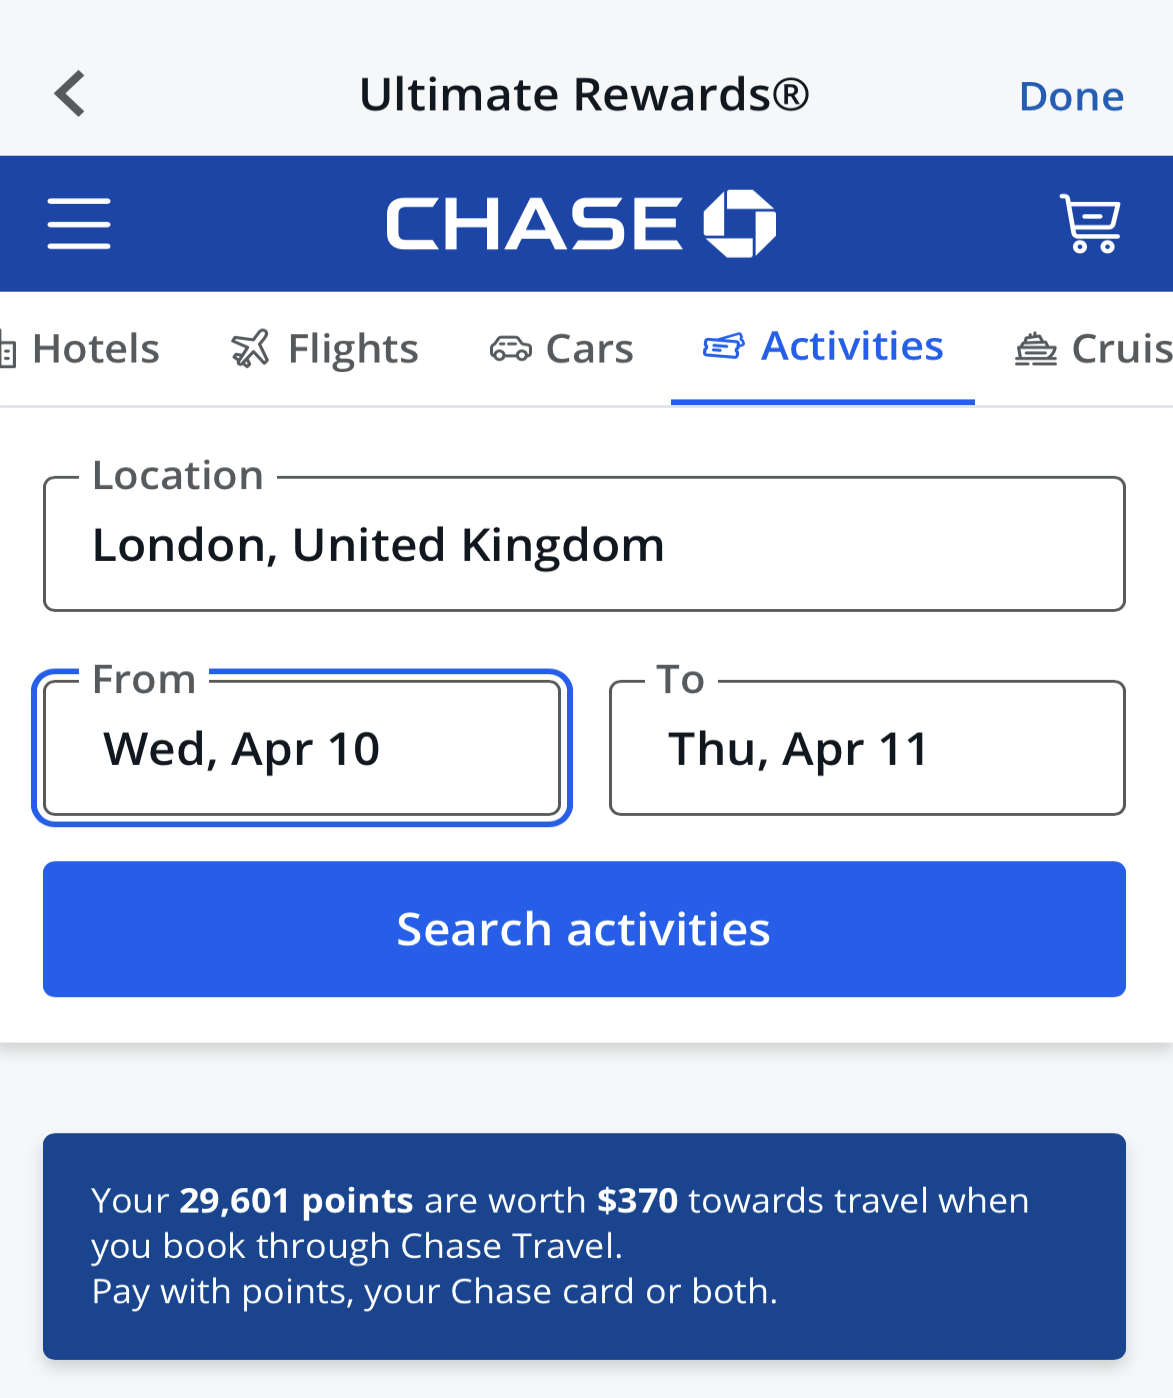 Chase redeem points for Activities